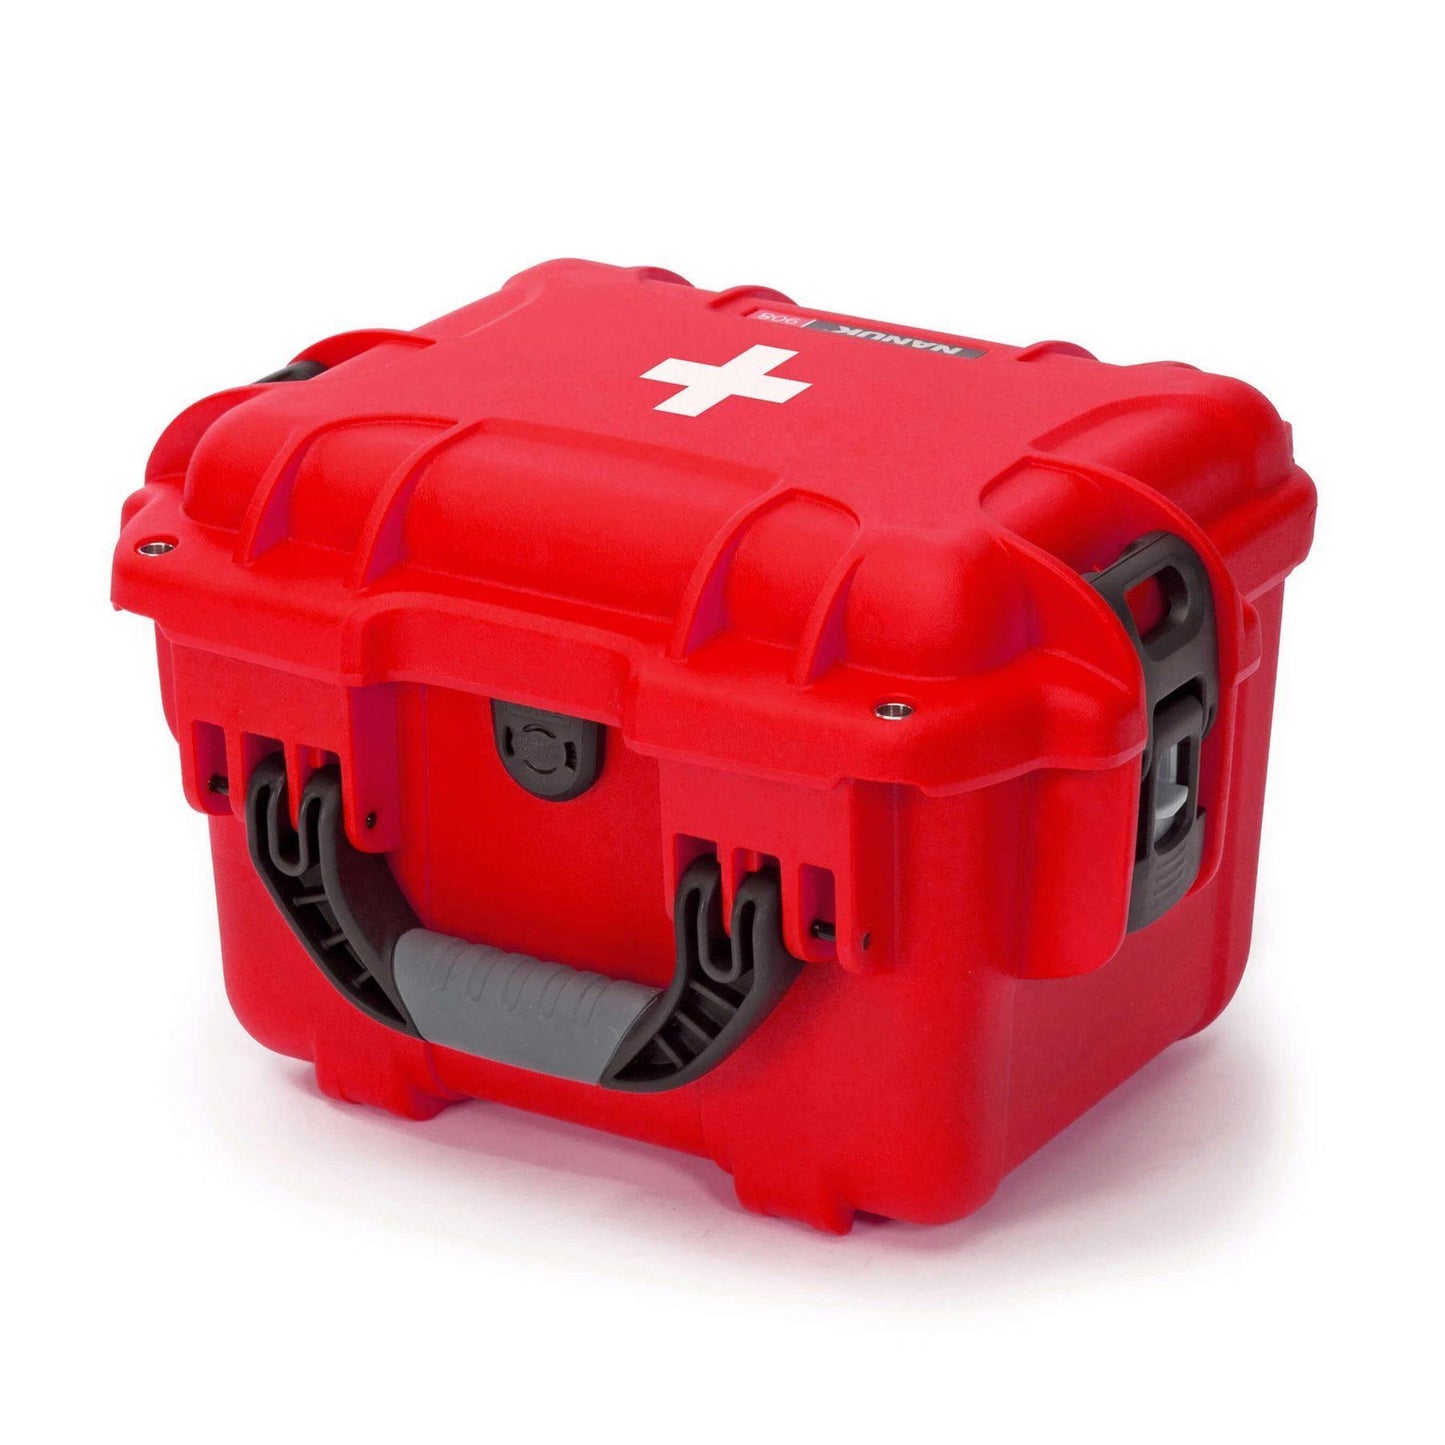 NANUK 908 First Aid Waterproof and Durable Case - FirstAidPlus